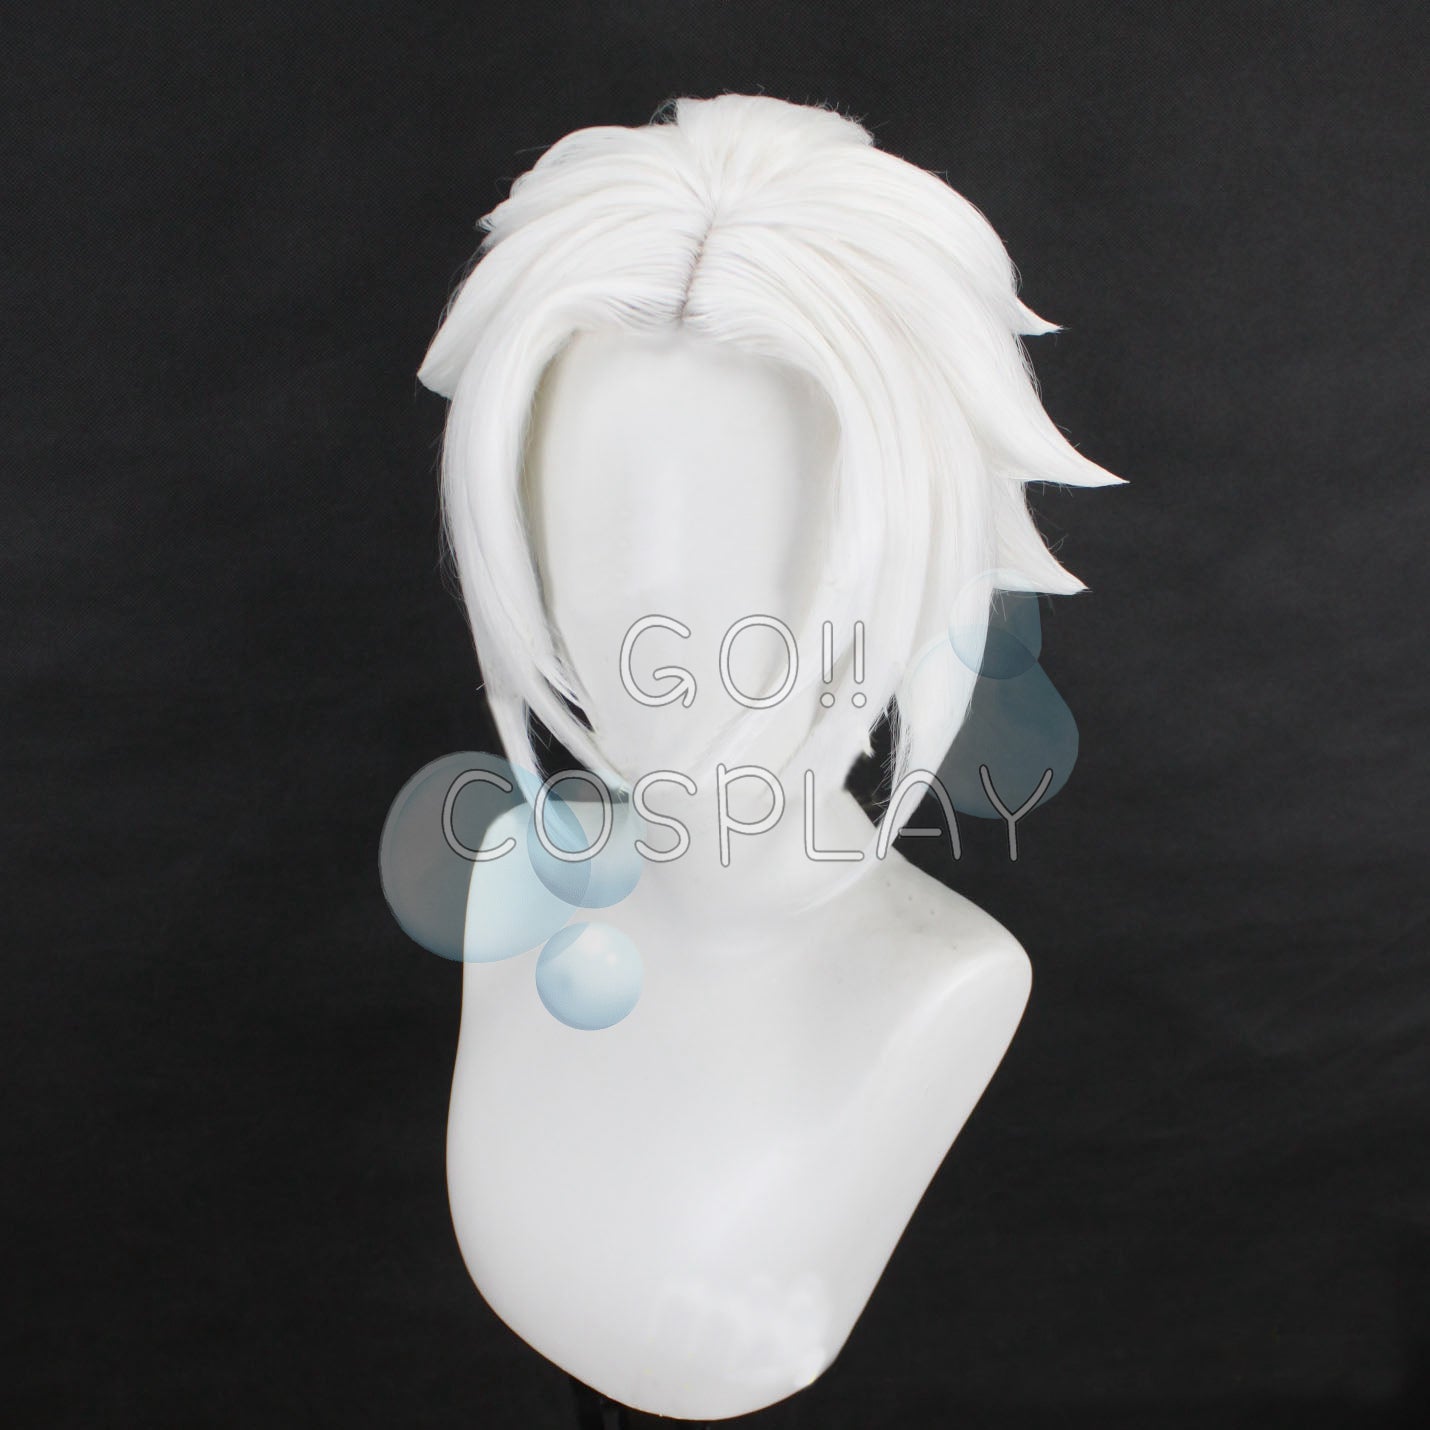 Arval Fire Emblem Cosplay Wig for Sale